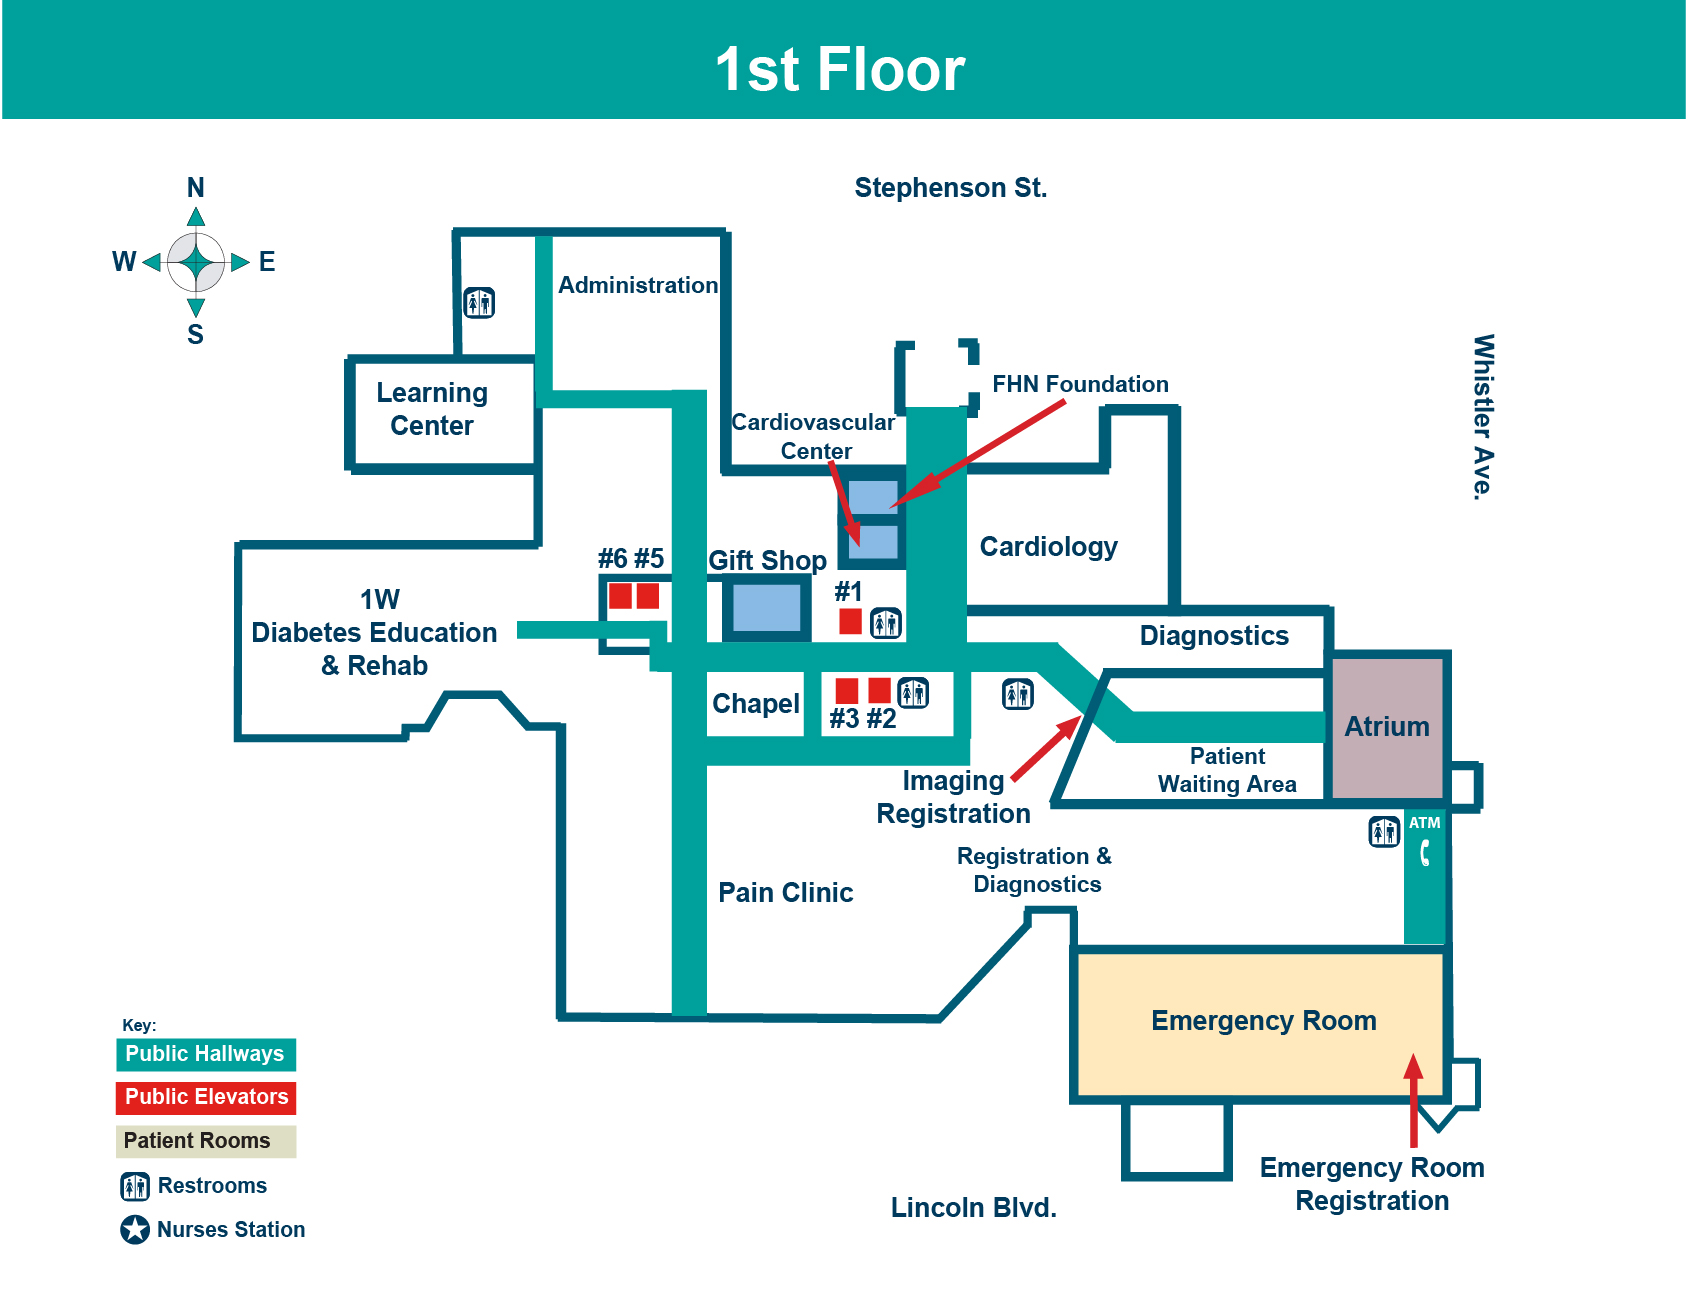 FHN Memorial Hospital first floor layout